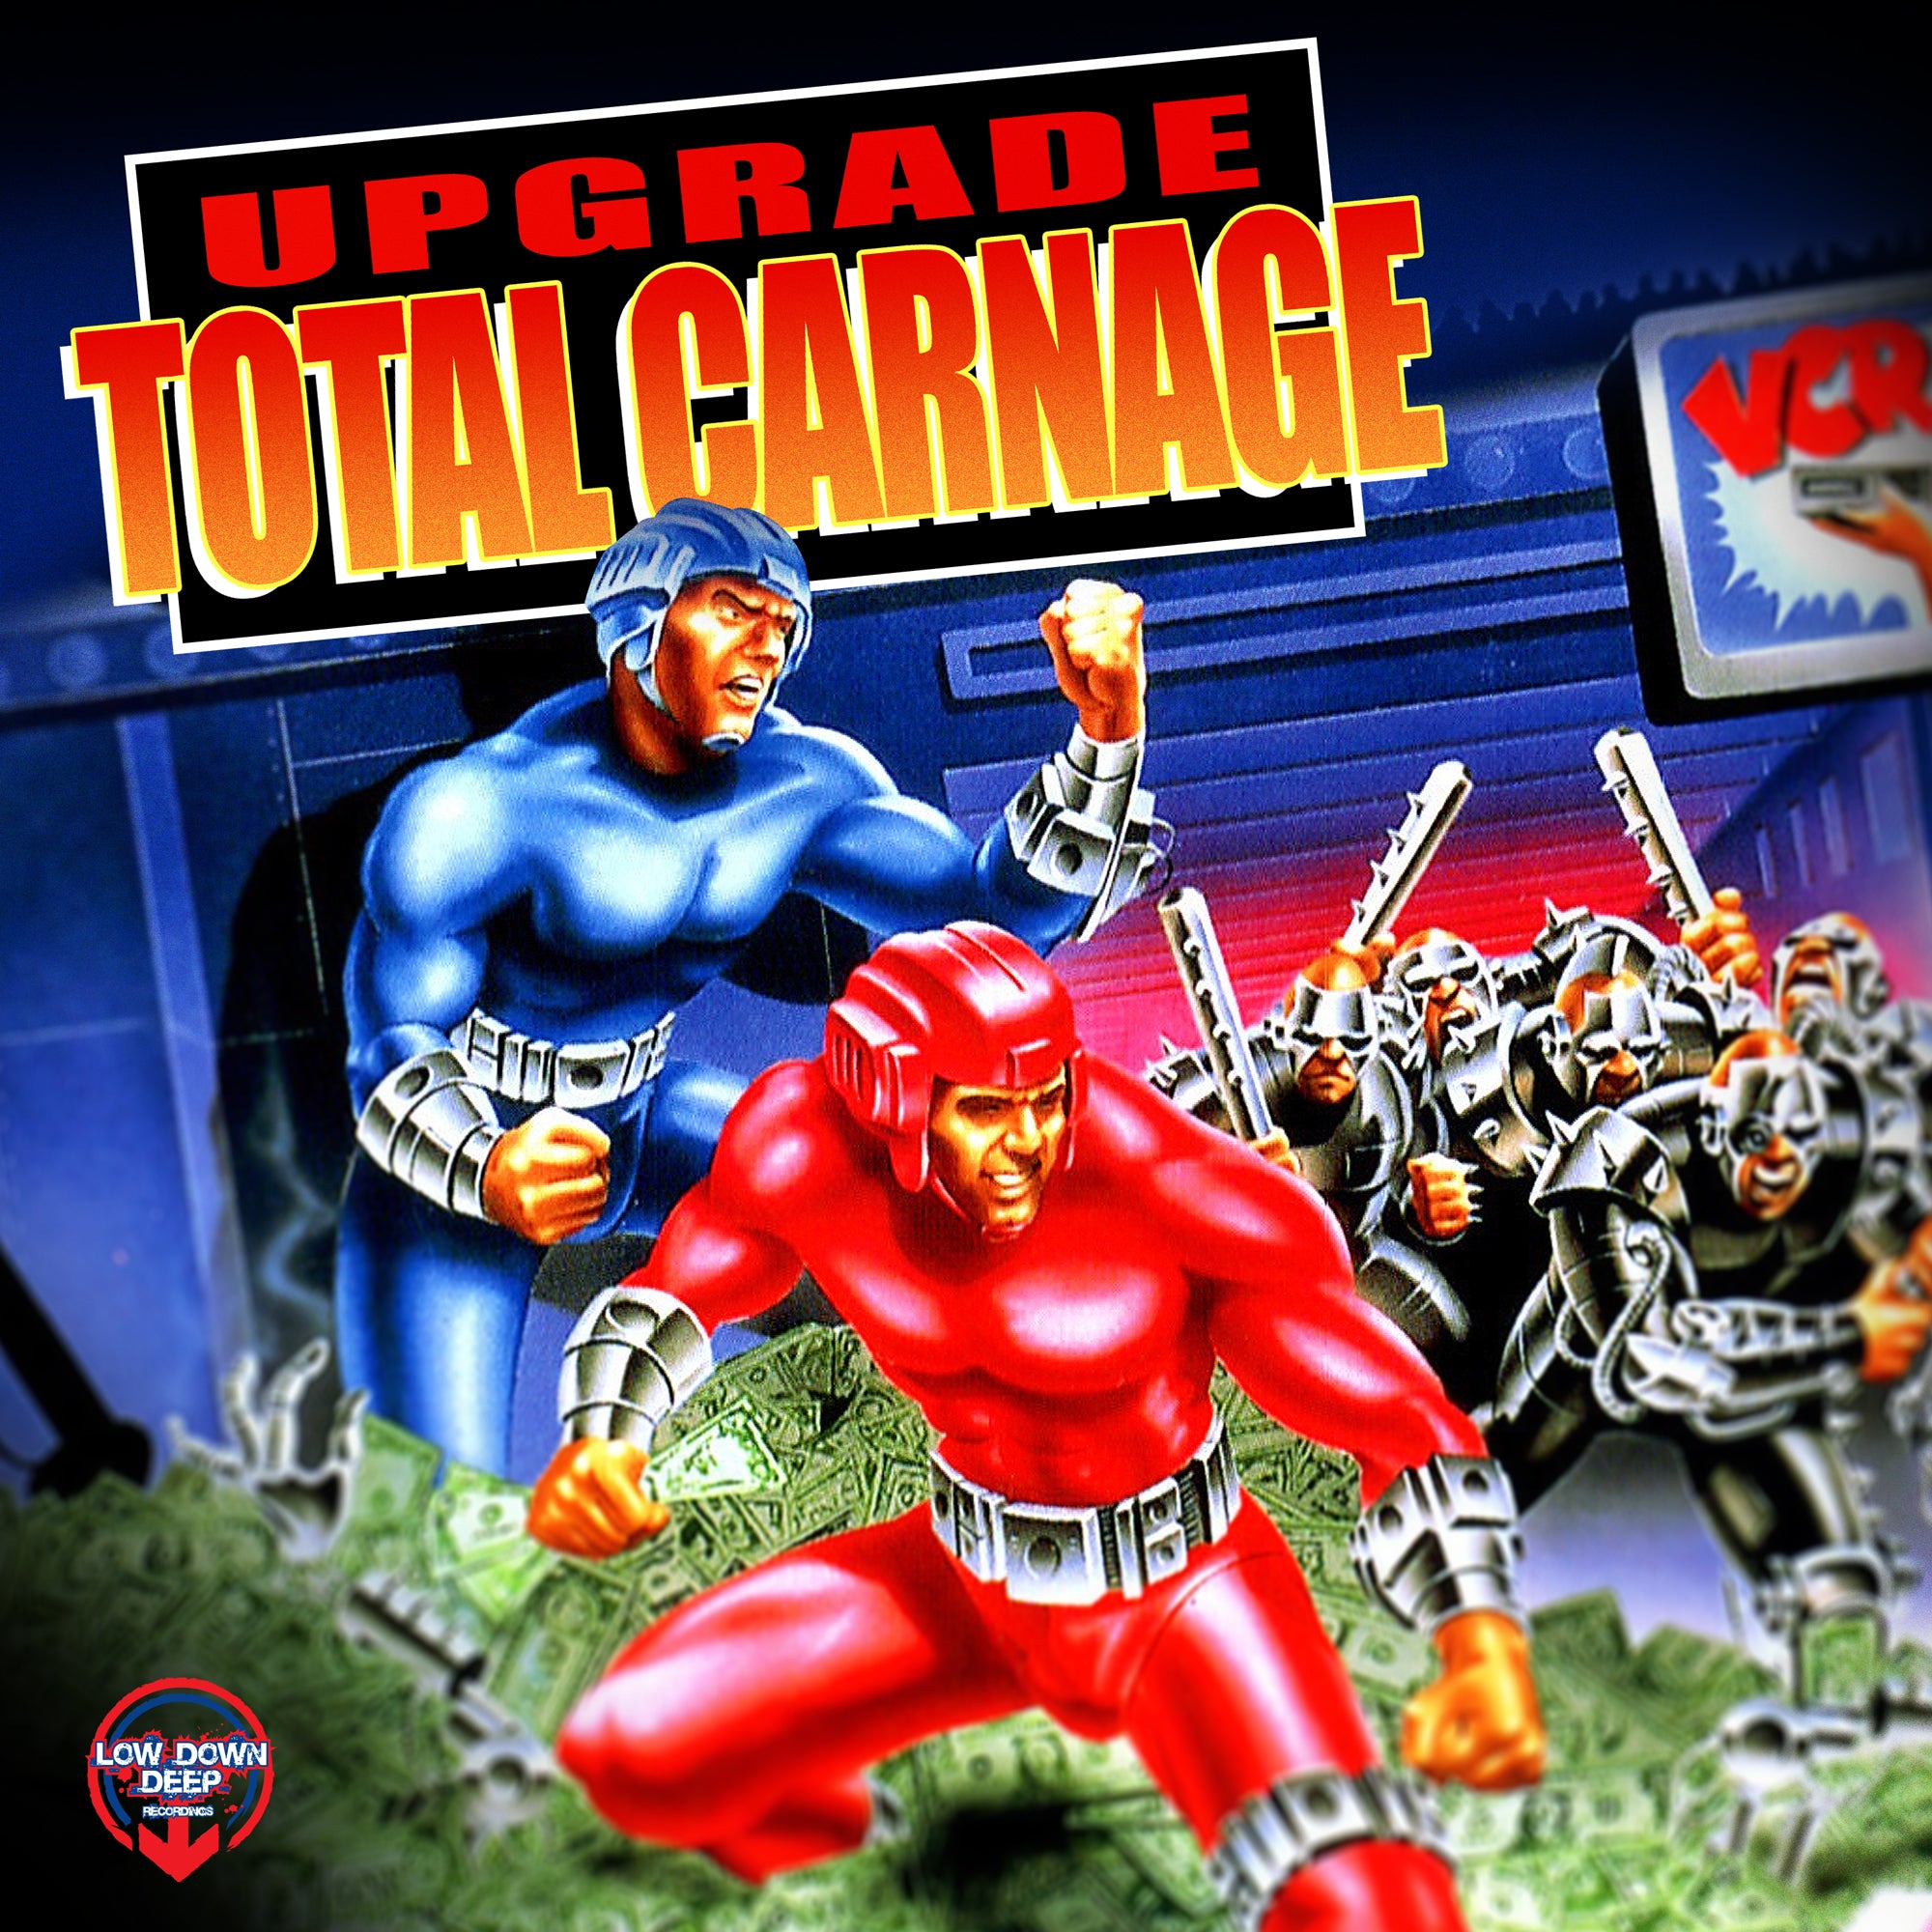 Total carnage. Тотал Карнаж. Upgrade 'total Carnage'. Total Carnage Snes обложка. Dos total Carnage Cover.